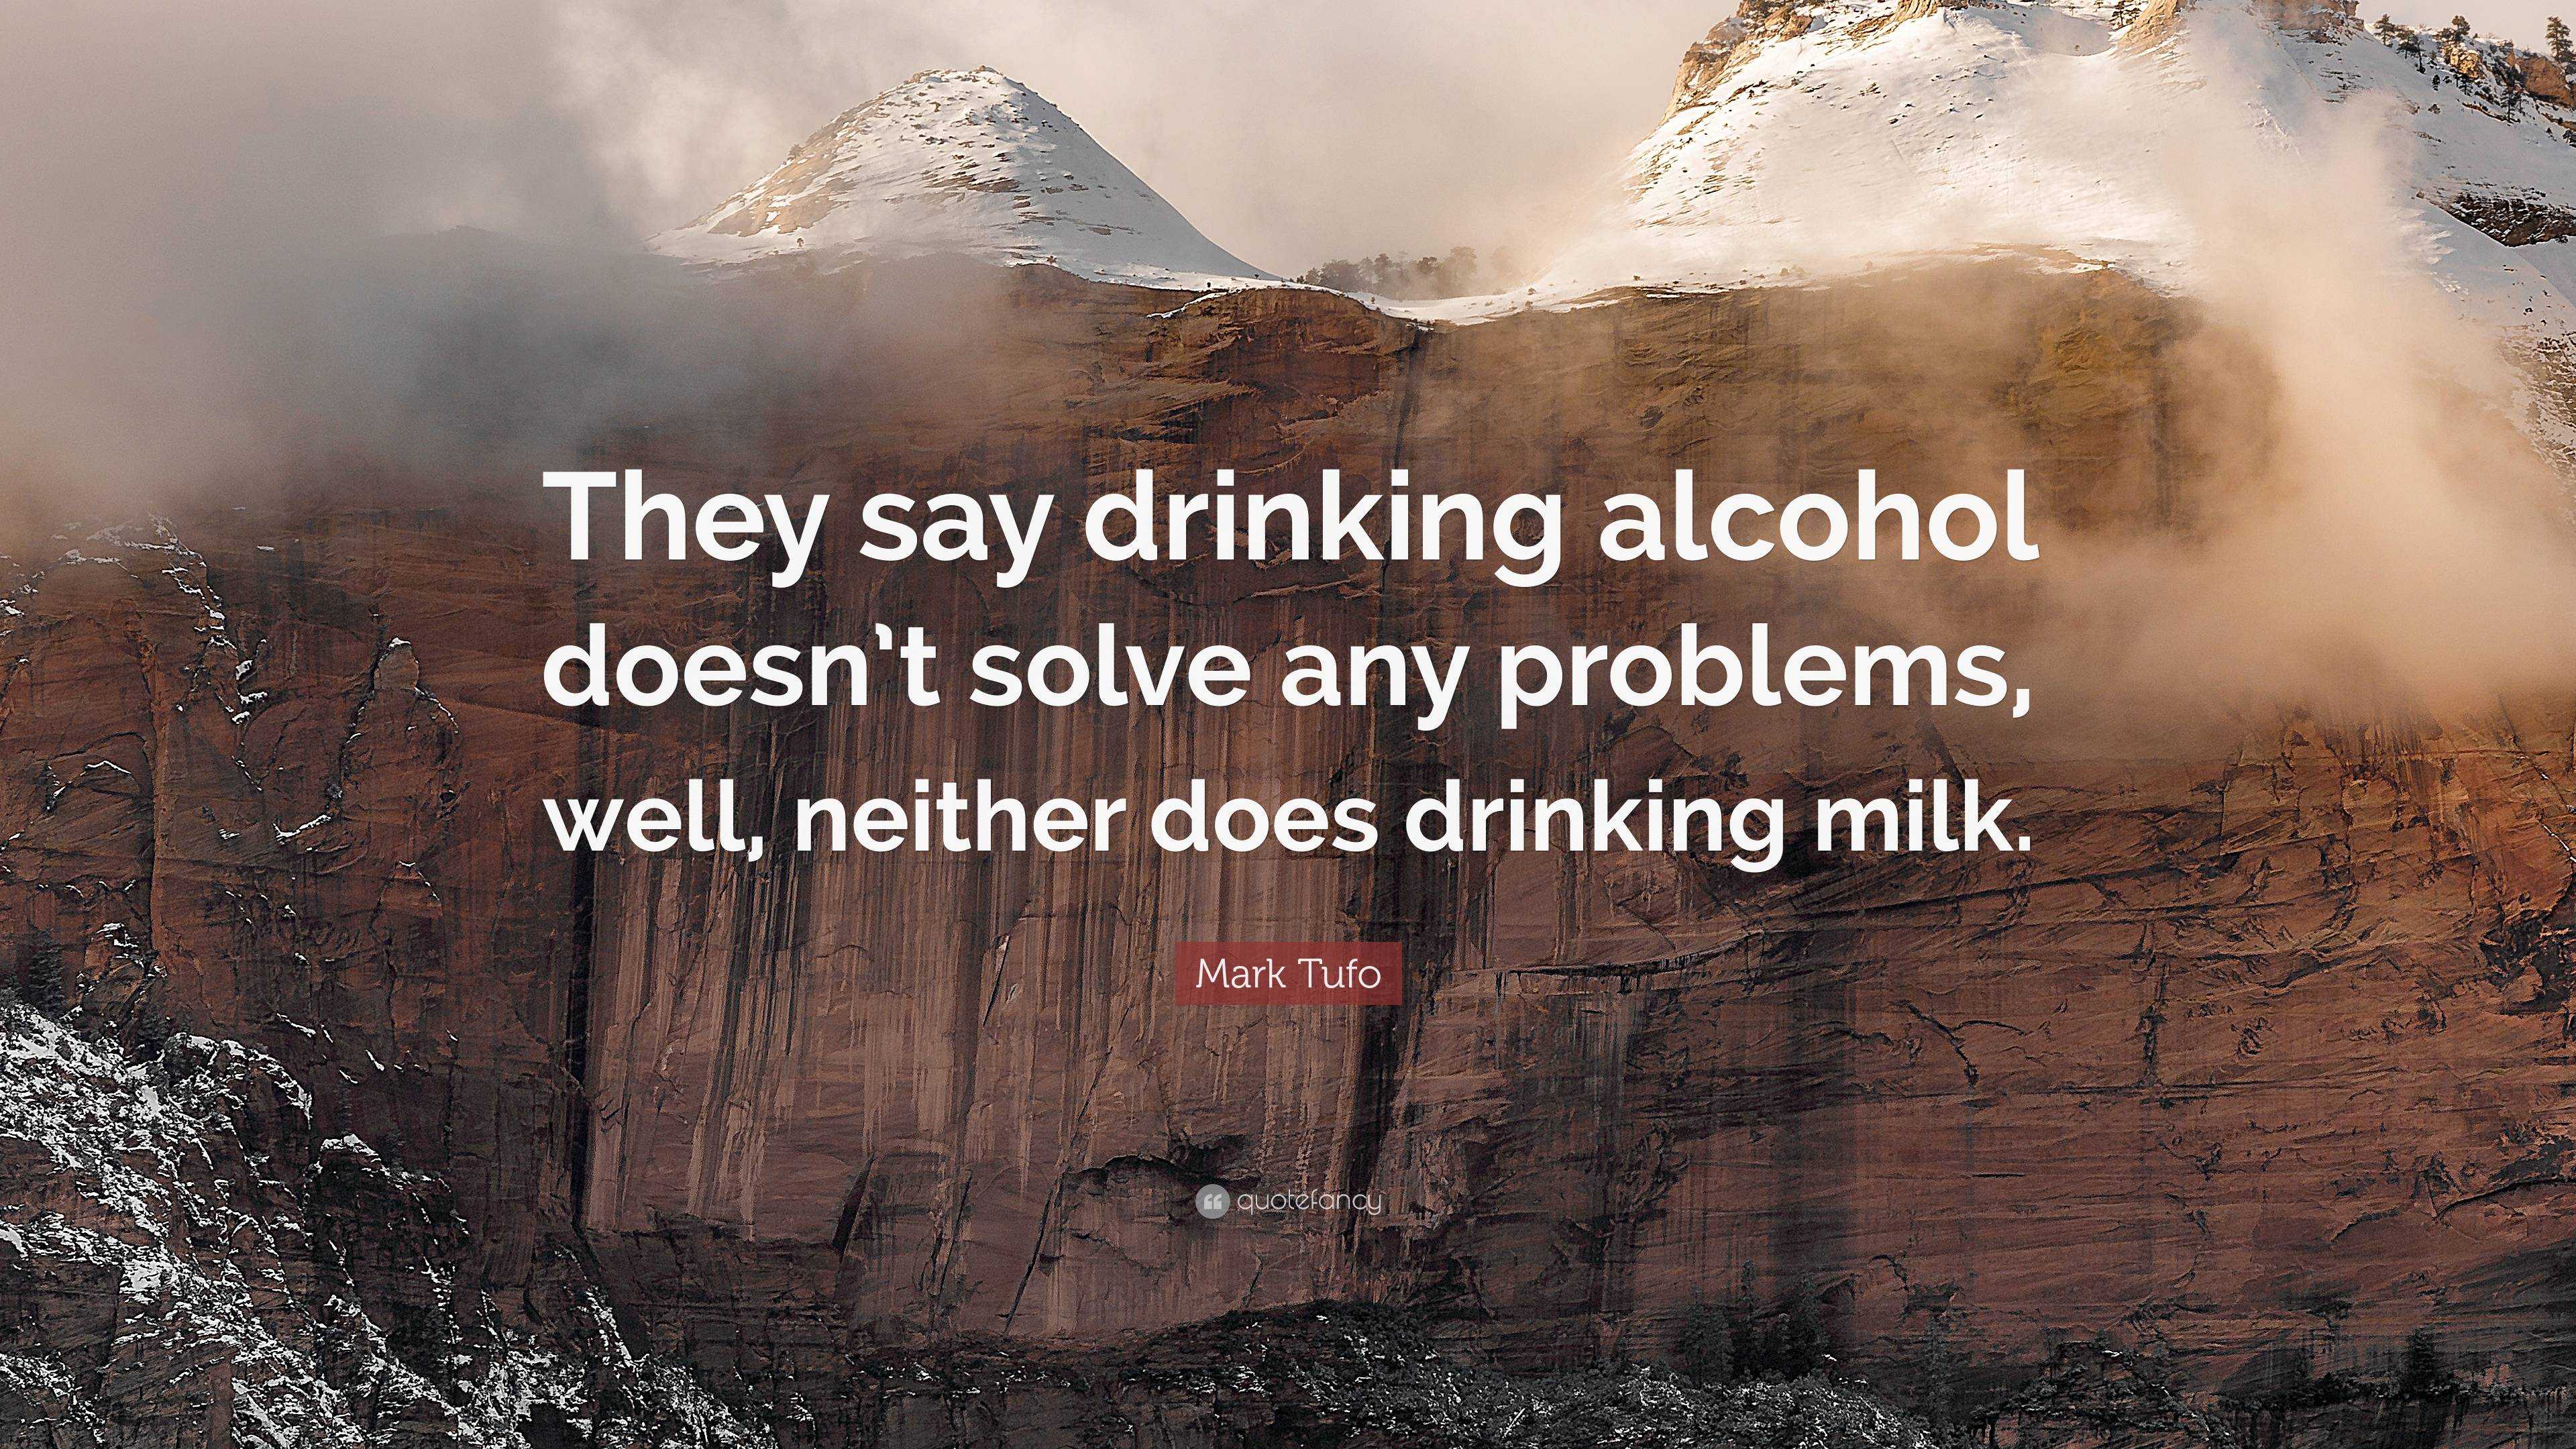 Alcohol Doesn't Solve Any Problems But Then Again Neither Does Milk 16